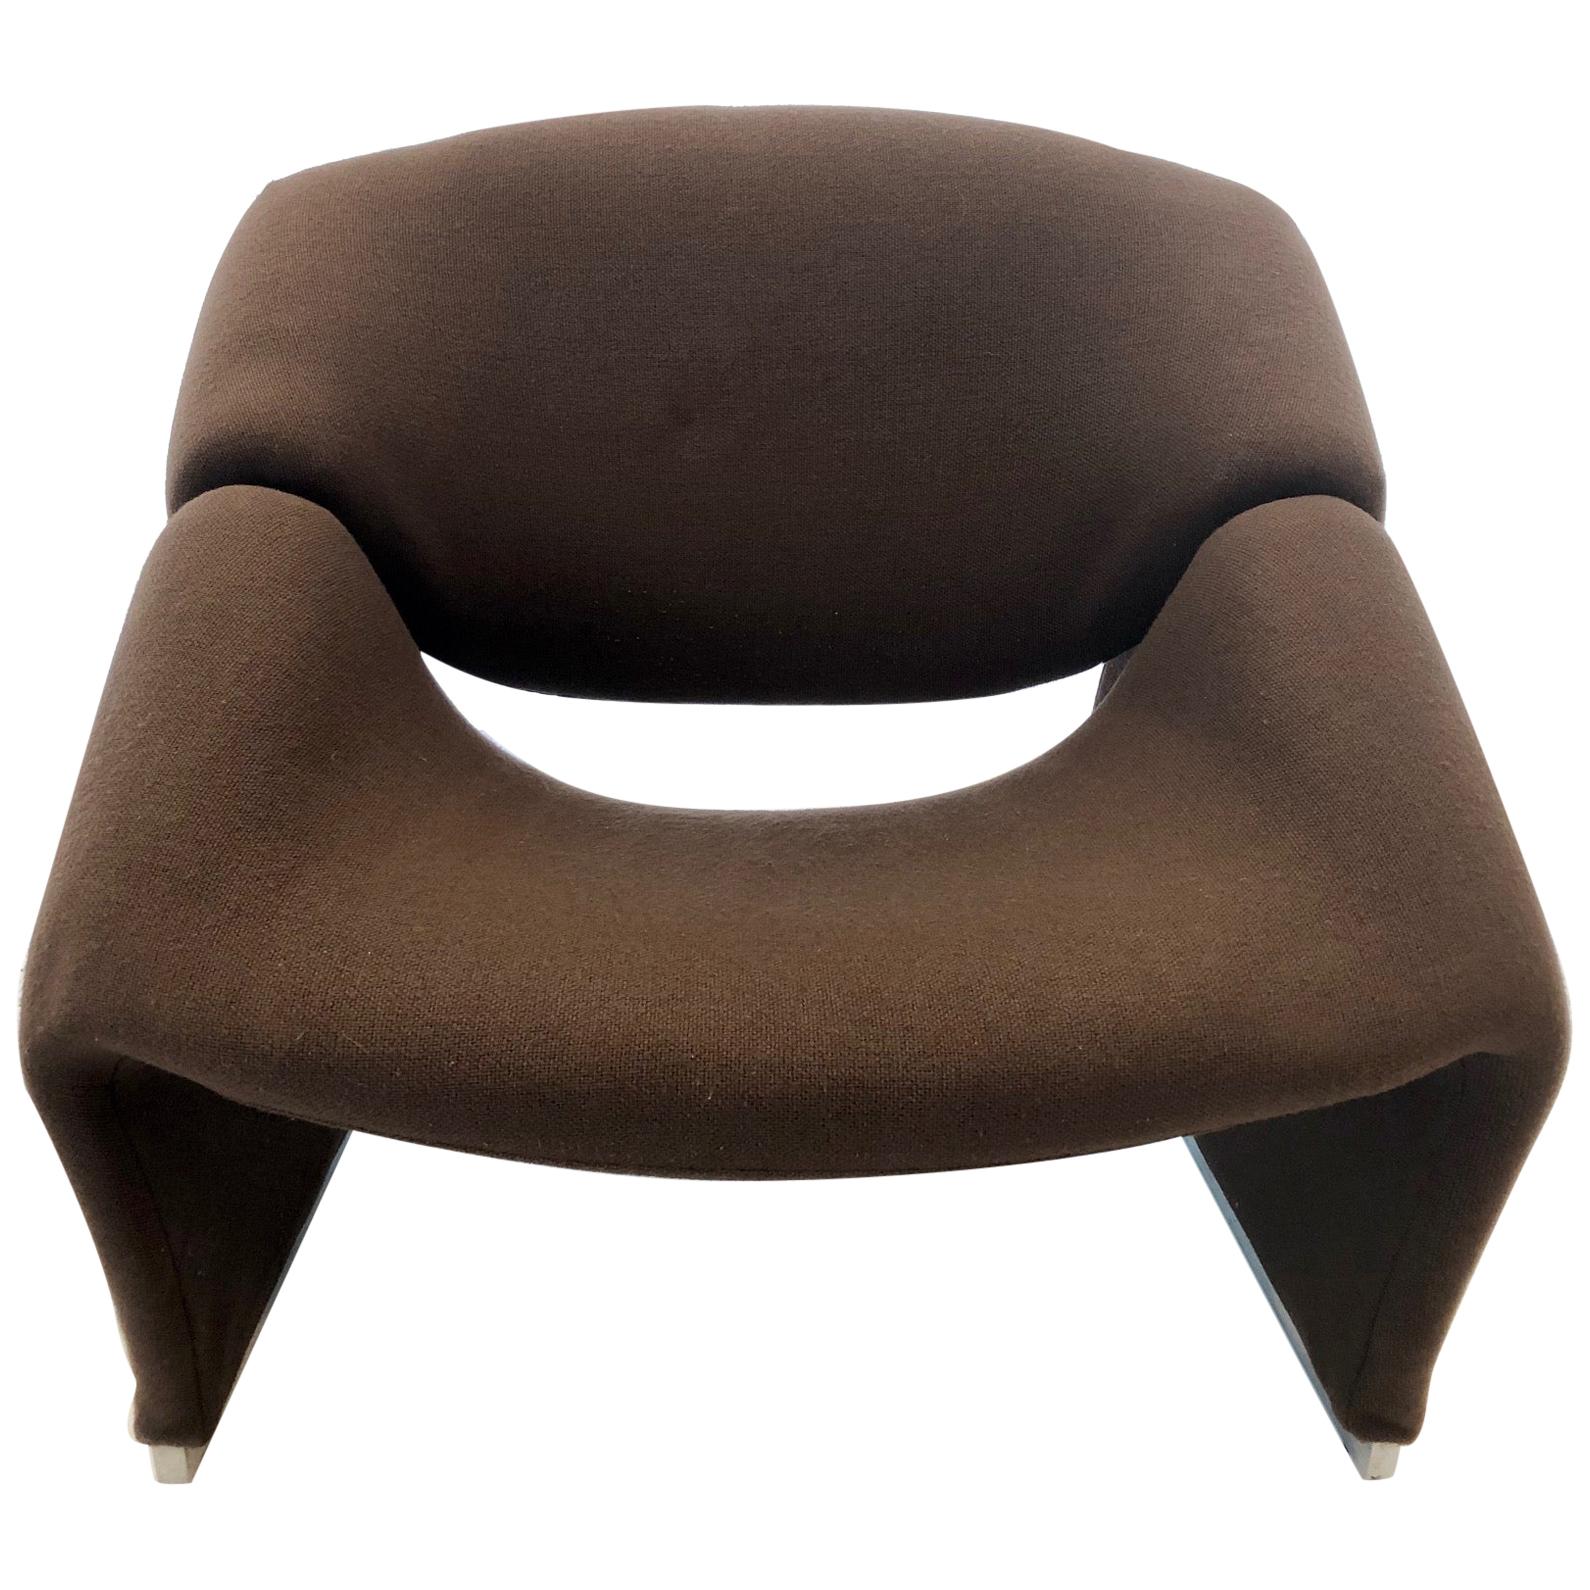 Pierre Paulin F580 Lounge Chair for Artifort, 1st Edition, circa 1960